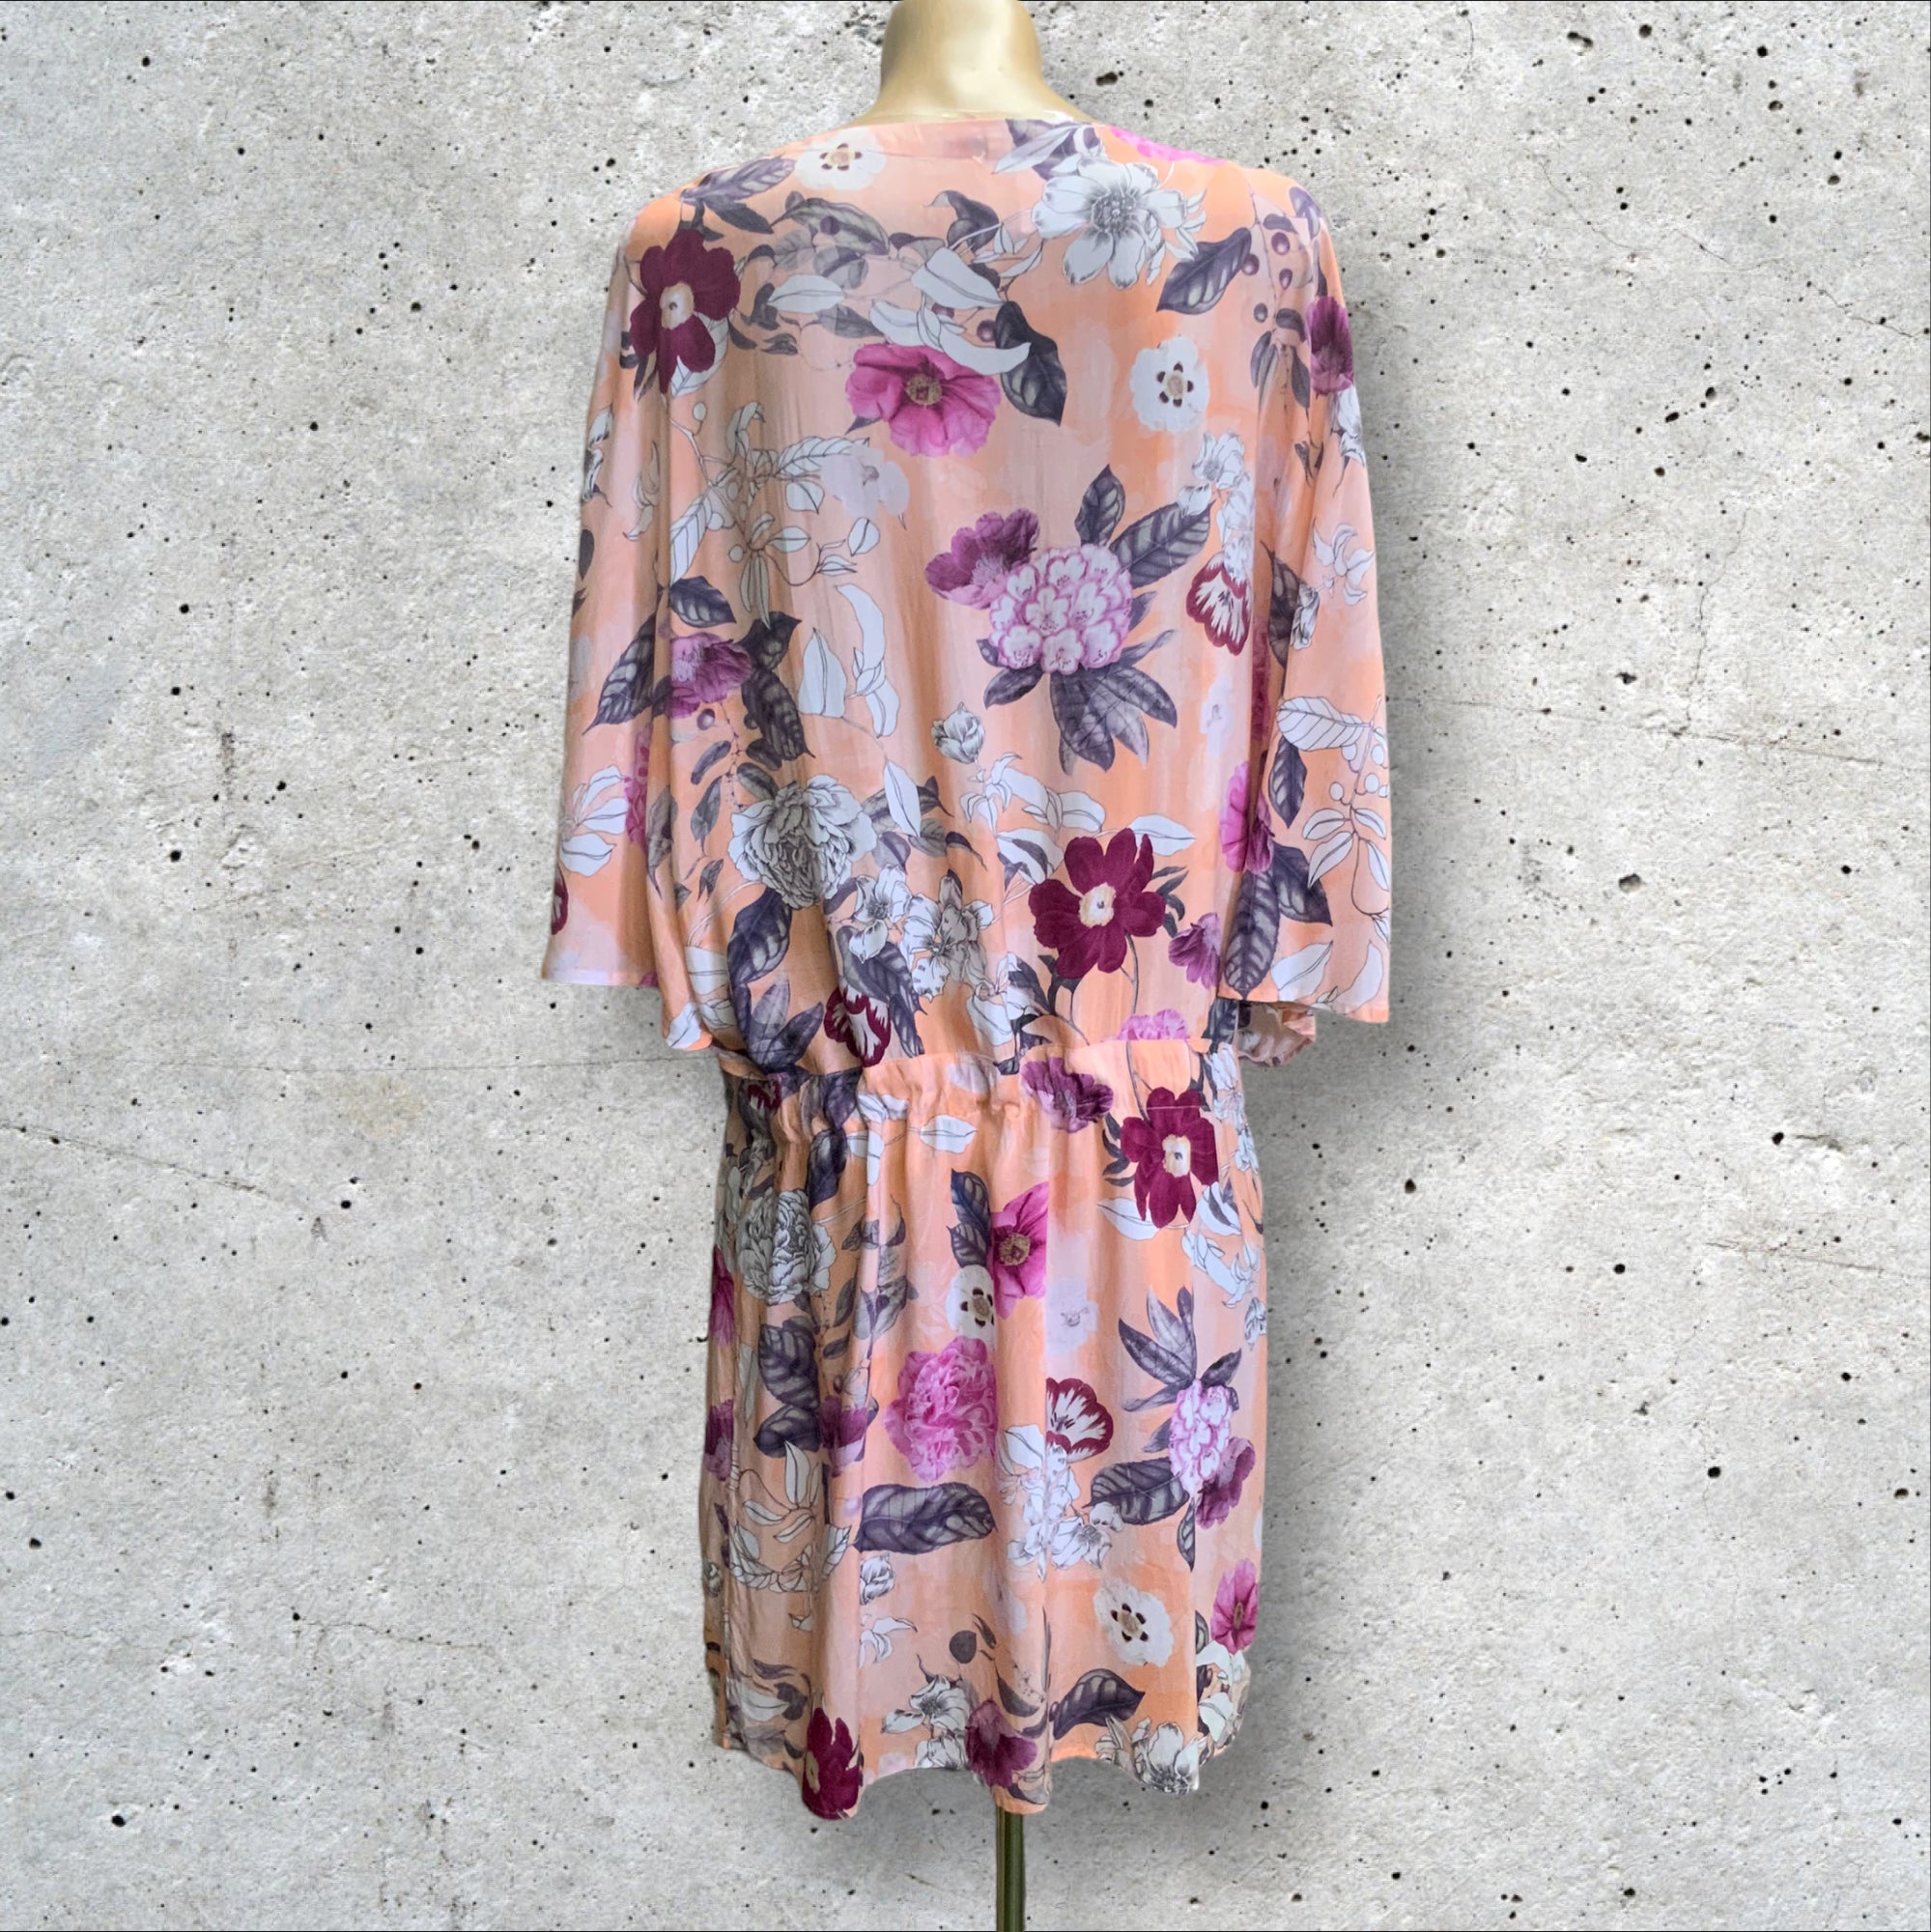 SEAFOLLY Standard Kaftan V Neck with Tie Waist Peach Floral Cover Up Dress - XS